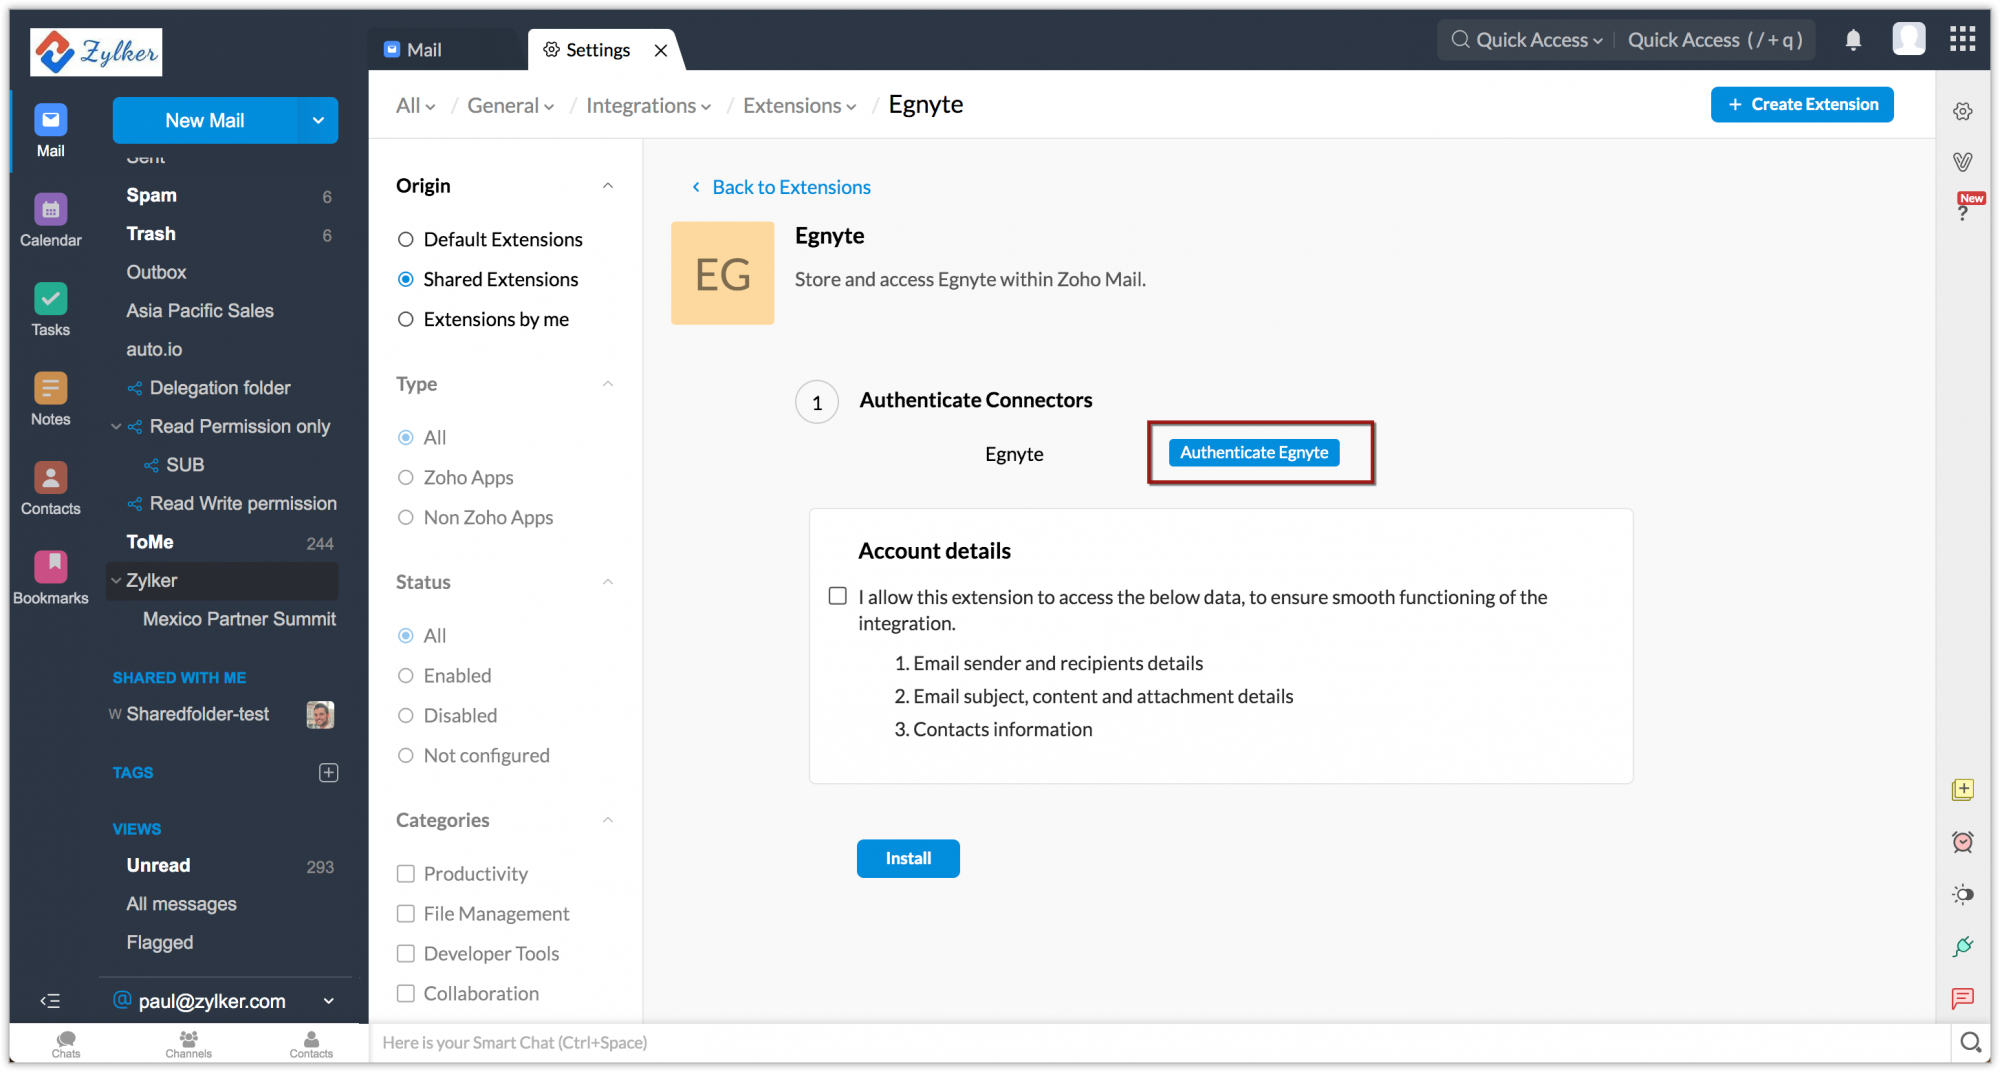 Authenticate Egnyte extension for your Zoho Mail